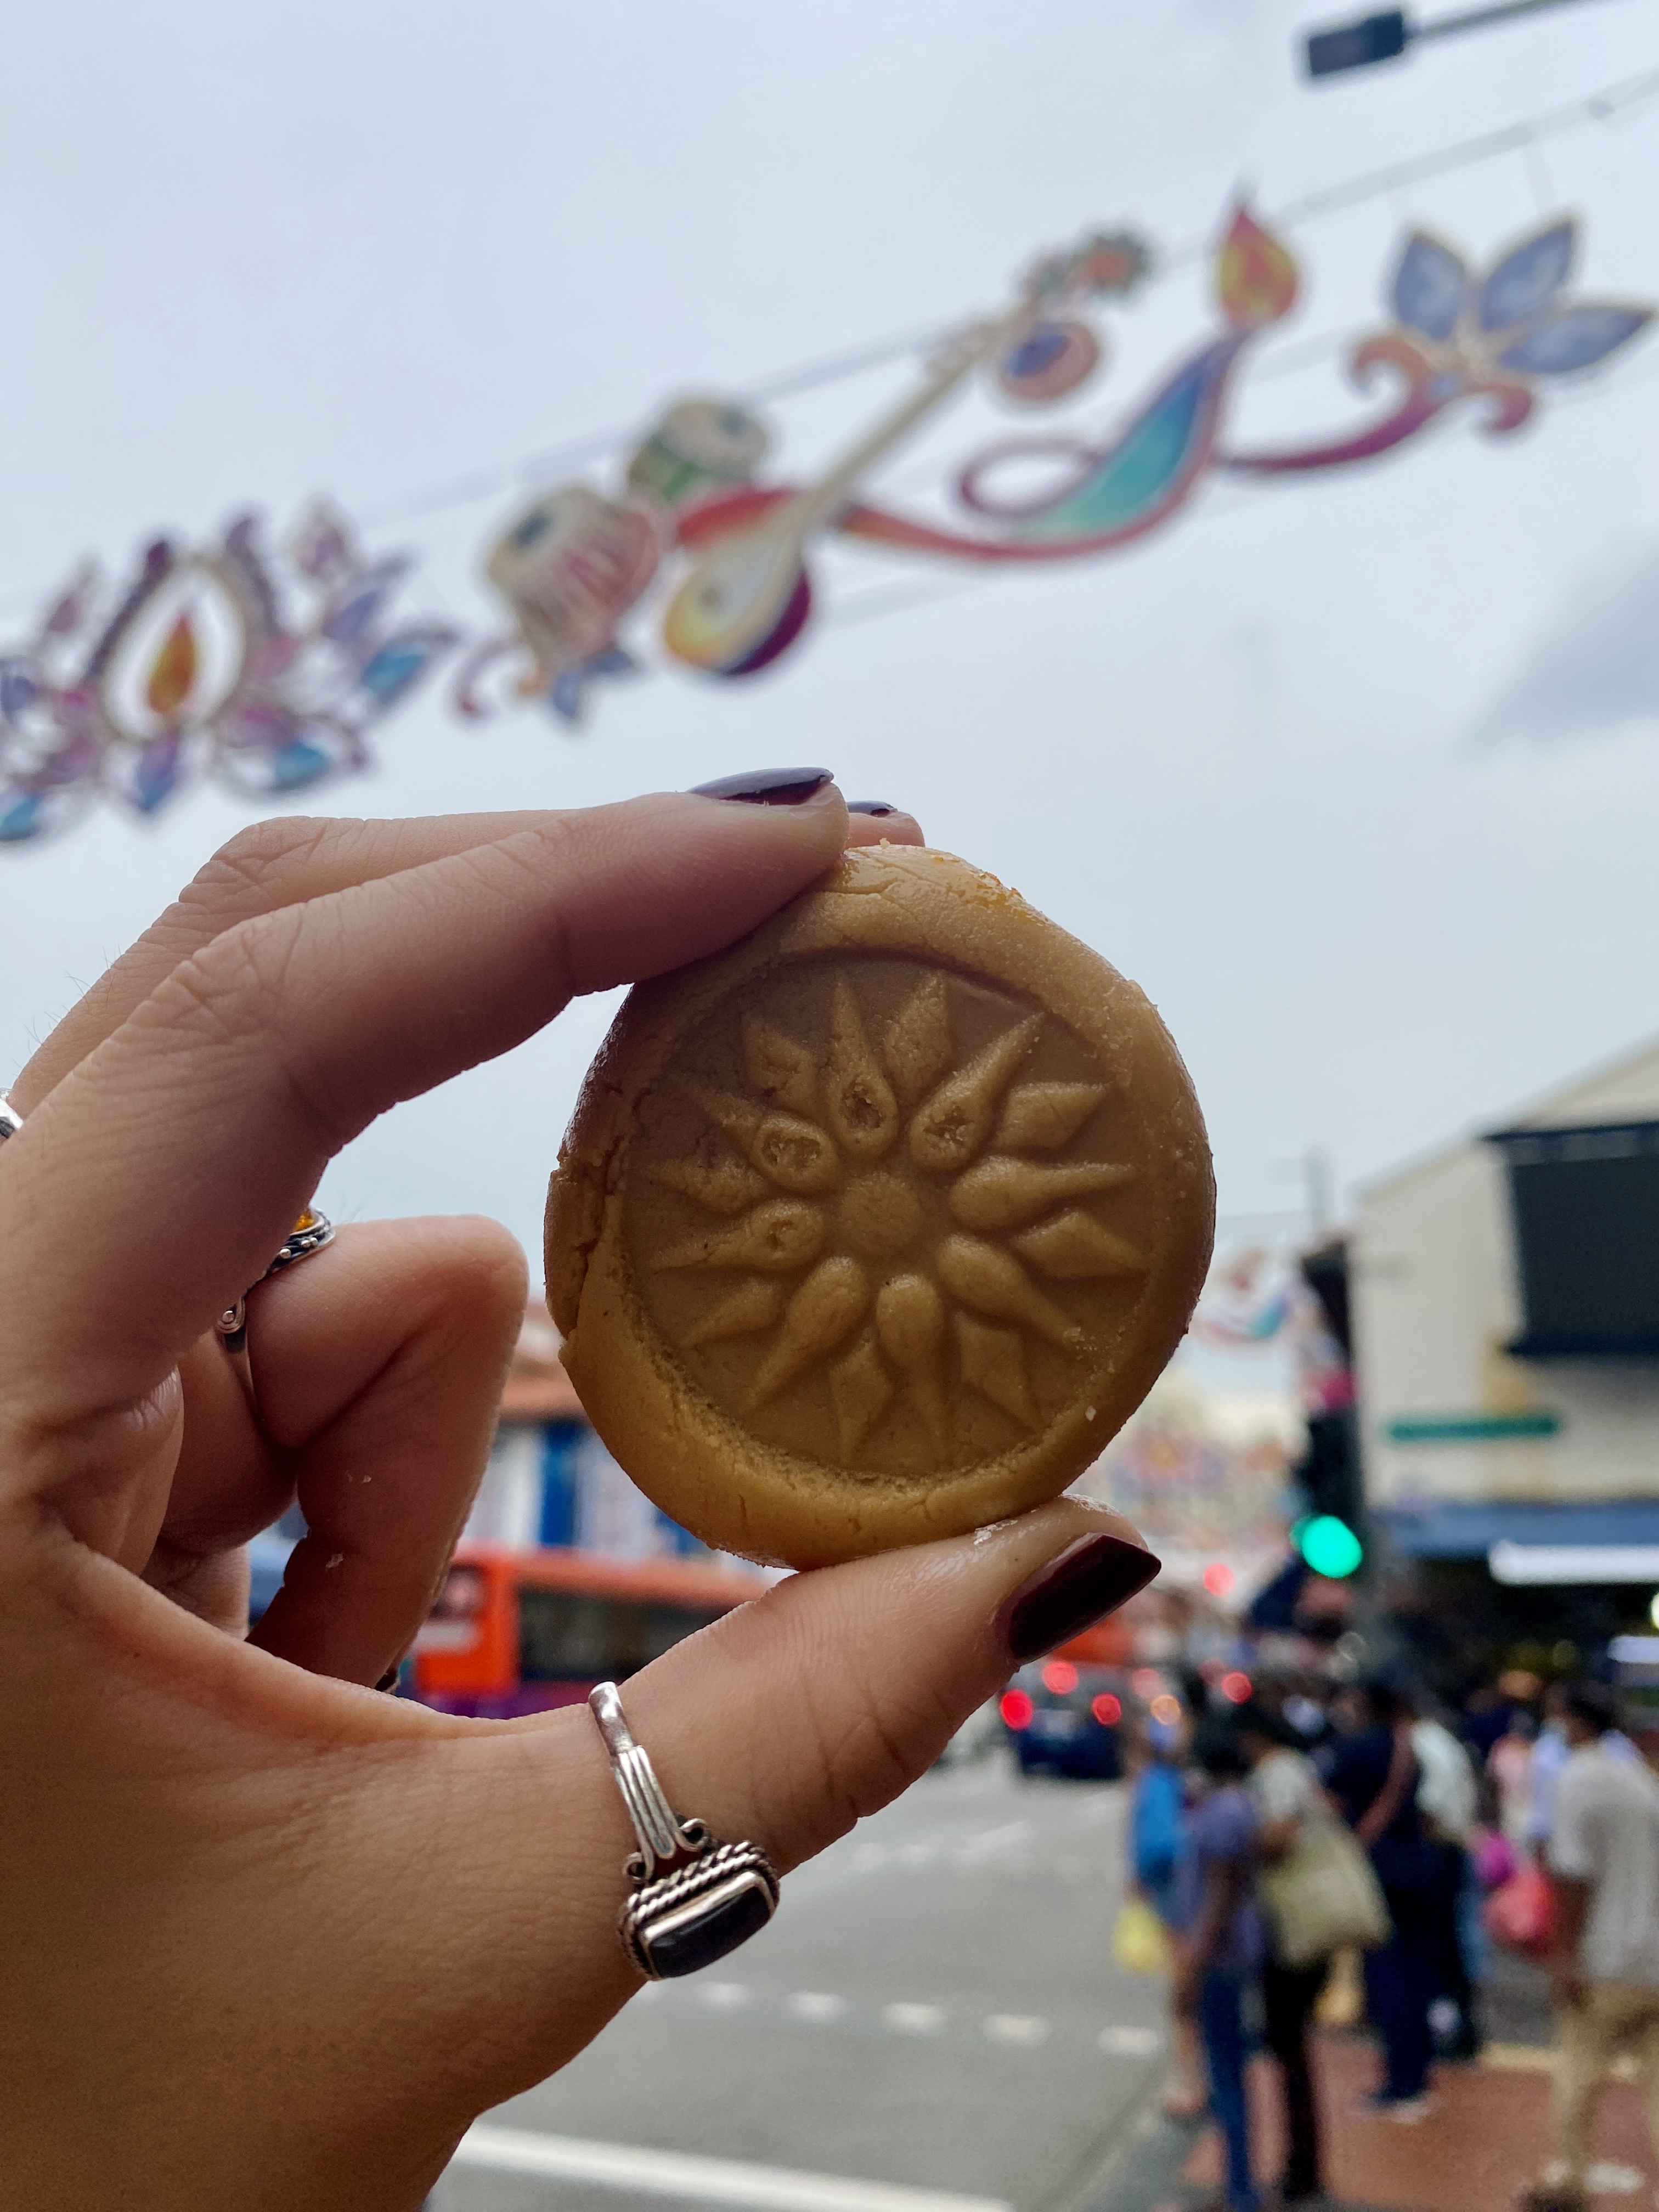 image of coin shaped snack against a street backdrop